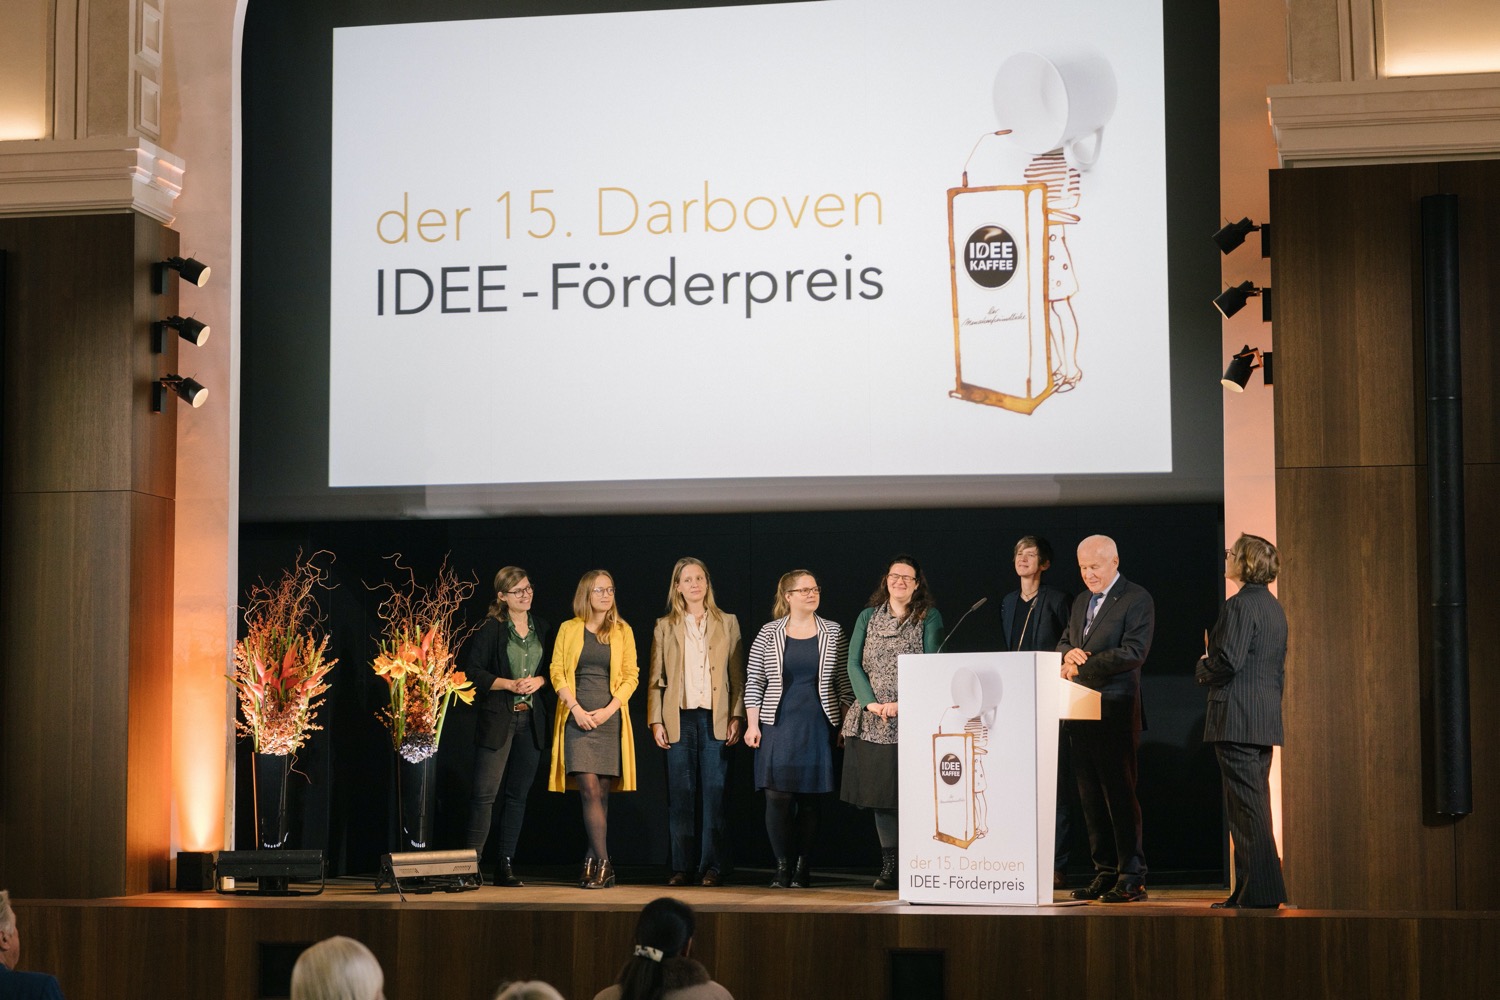 Award ceremony for the 15th Darboven IDEE Sponsorship Prize in Hamburg - finalists on stage